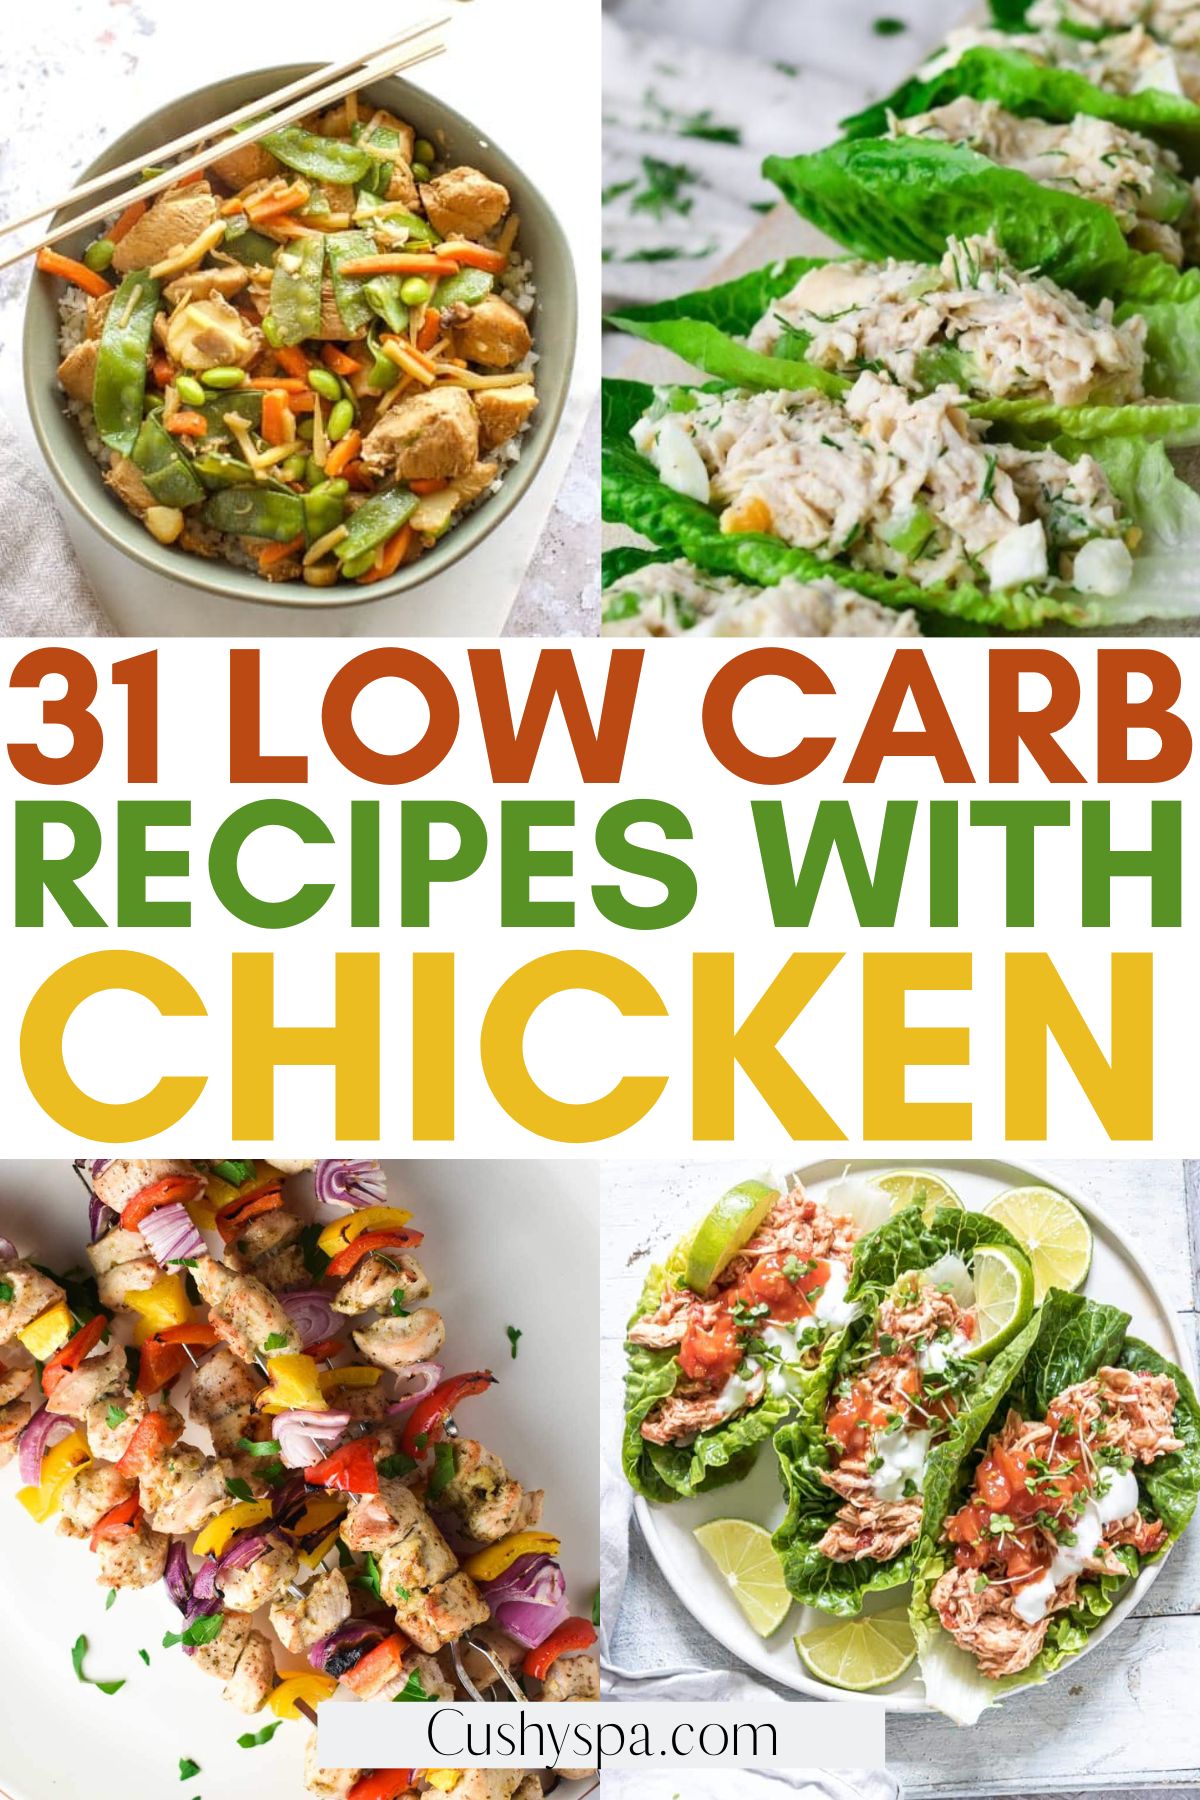 Low Carb Recipes with Chicken